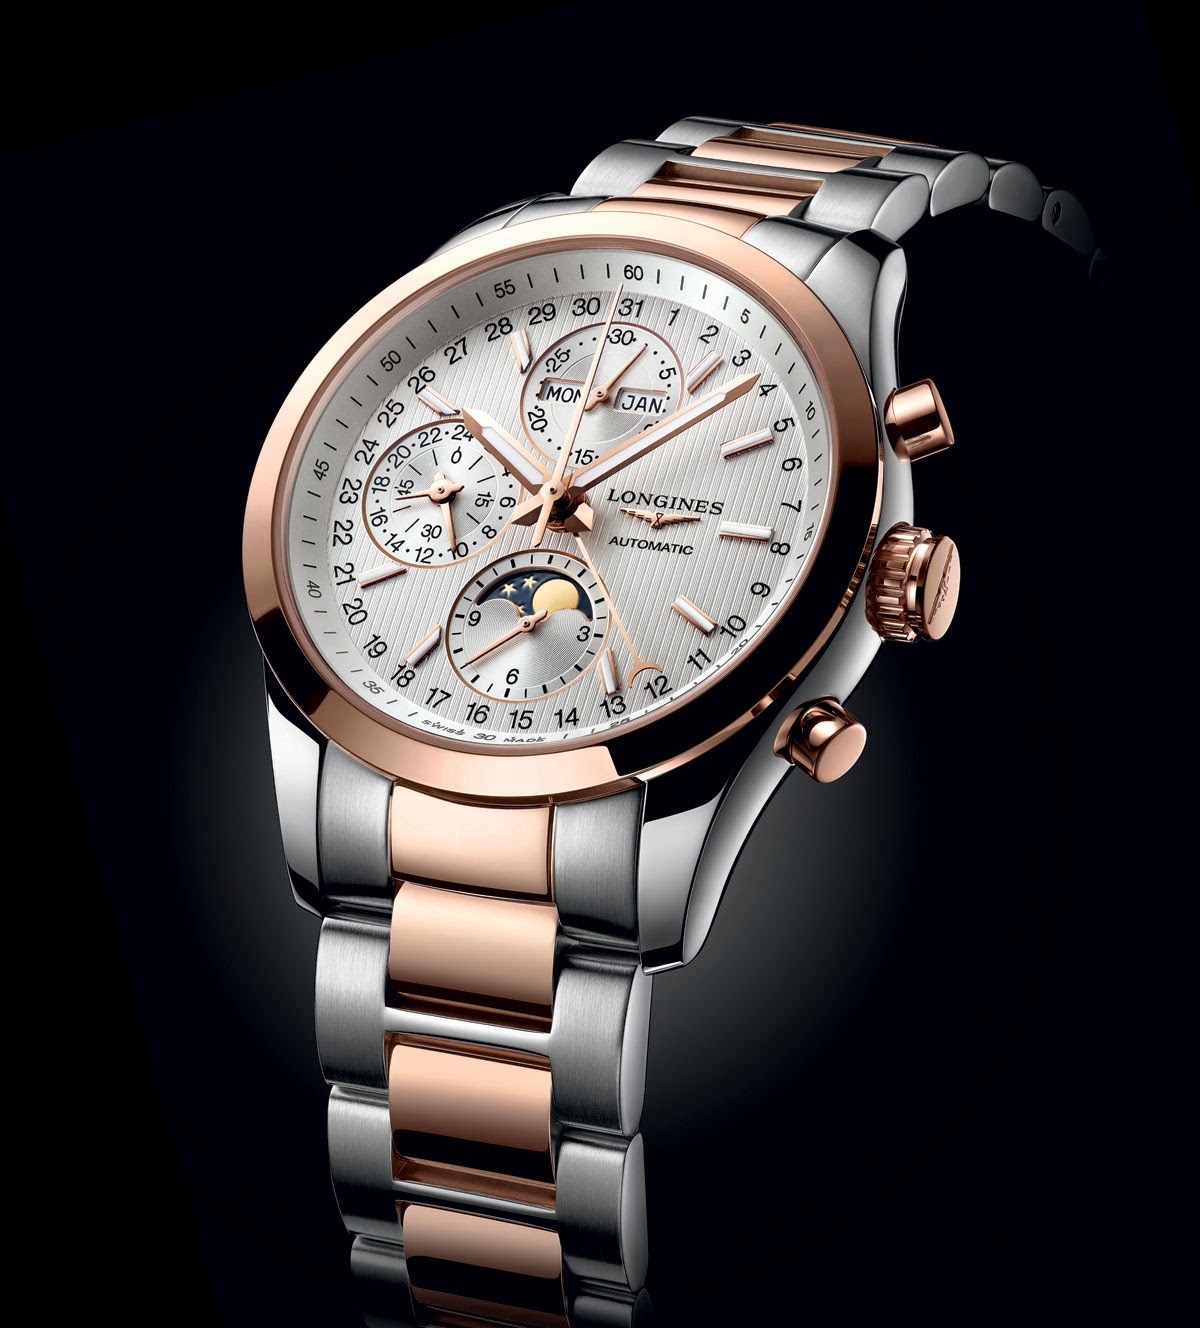 Longines - Conquest Classic Moonphase Chronograph | Time and Watches ...